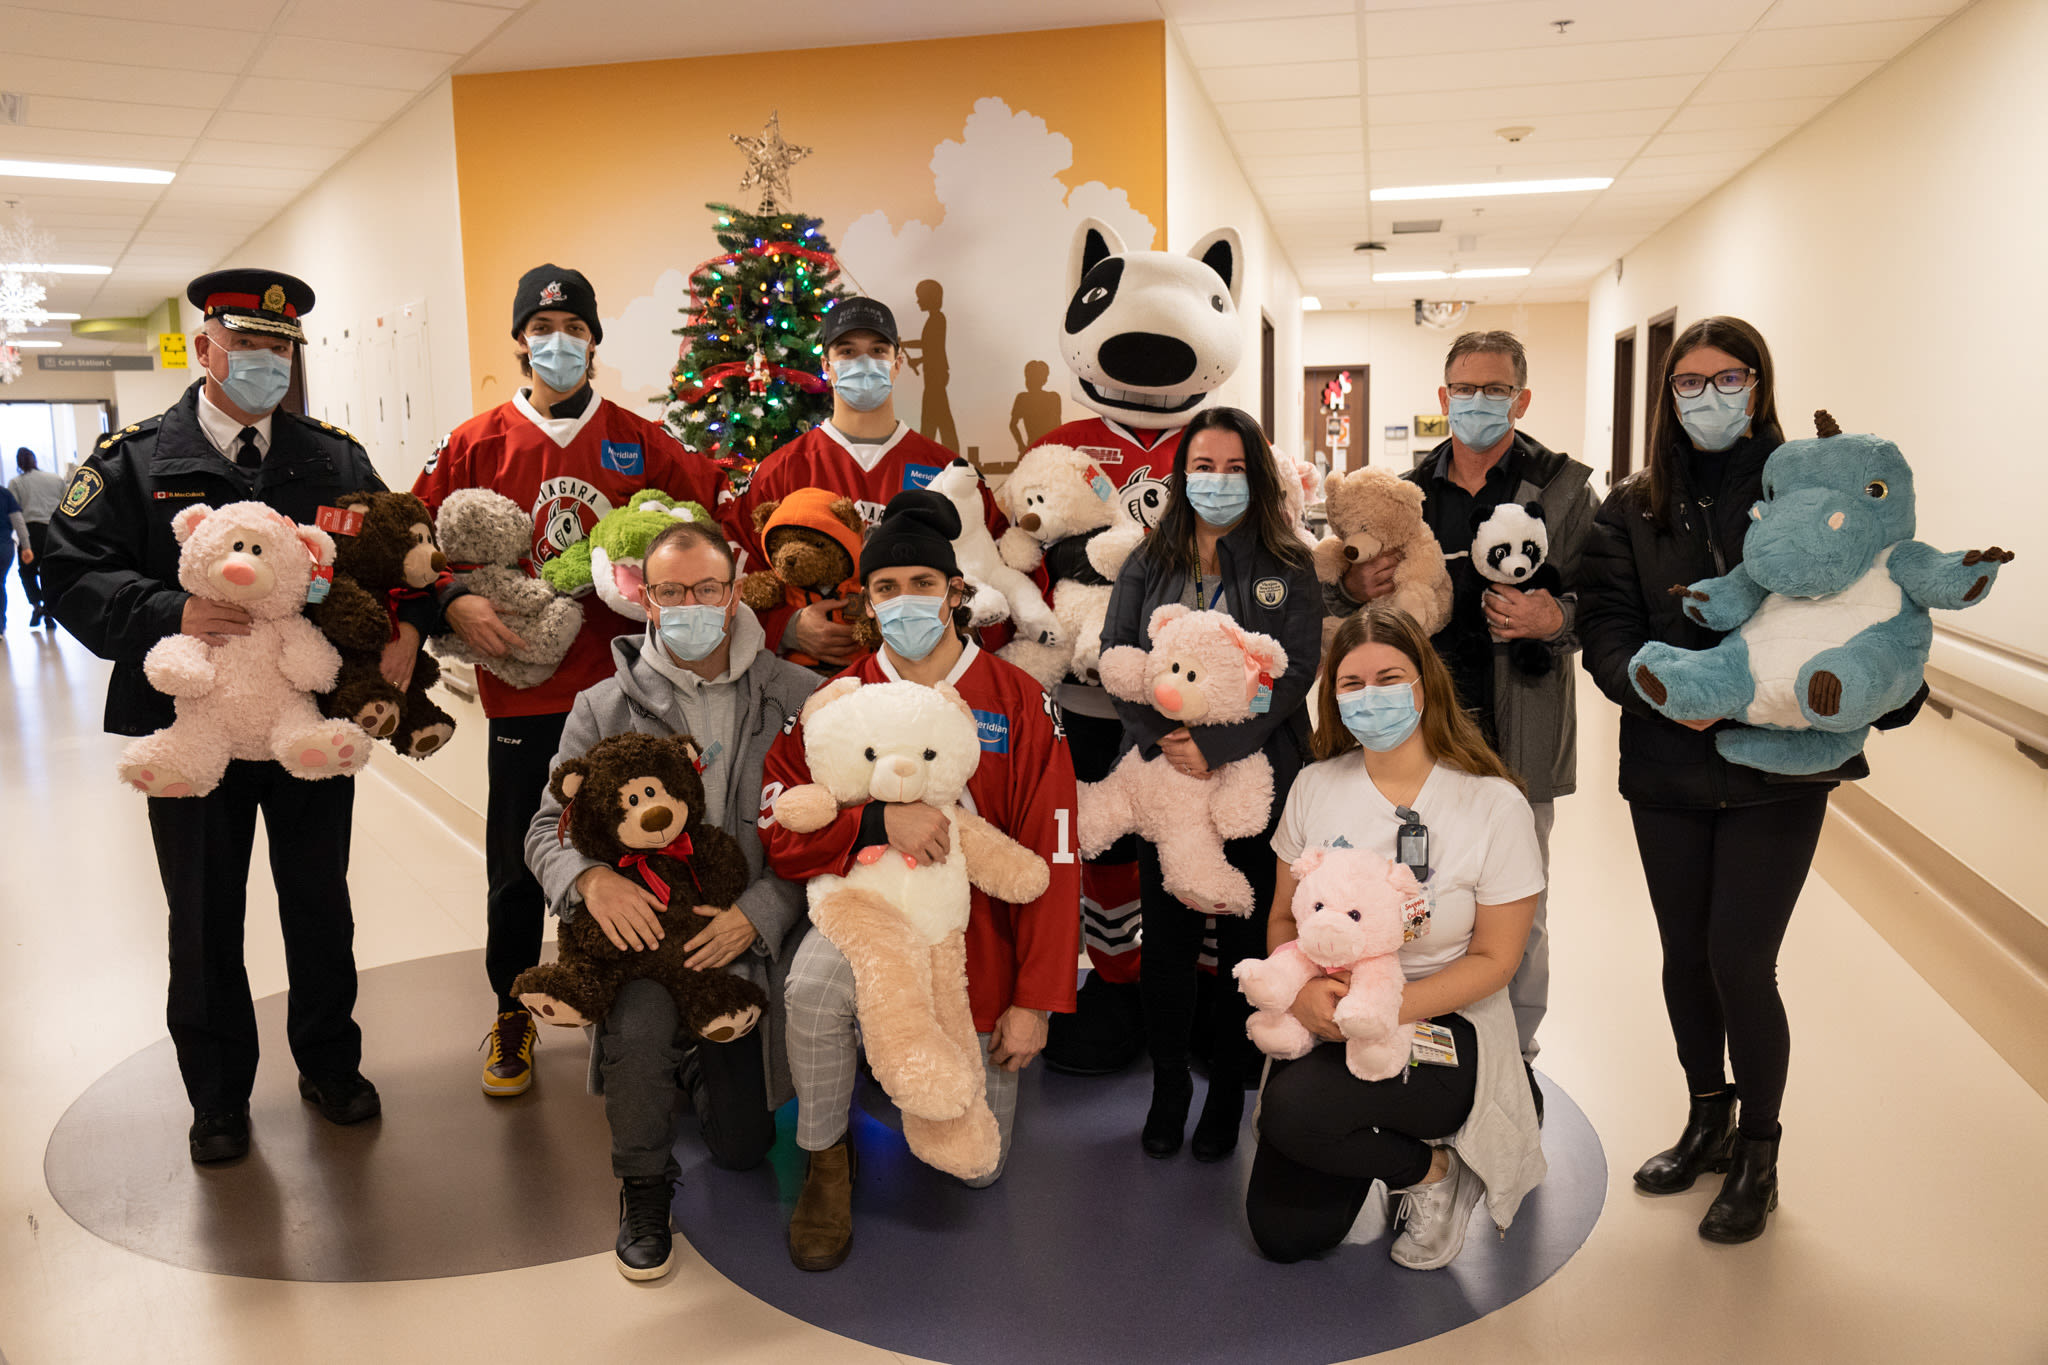 Niagara IceDog players, Chief MacCulloch and representatives from Victim Services Niagara standing in front of a Christmas tree holding teddy bears in the Children's Health Unit at Niagara Health 